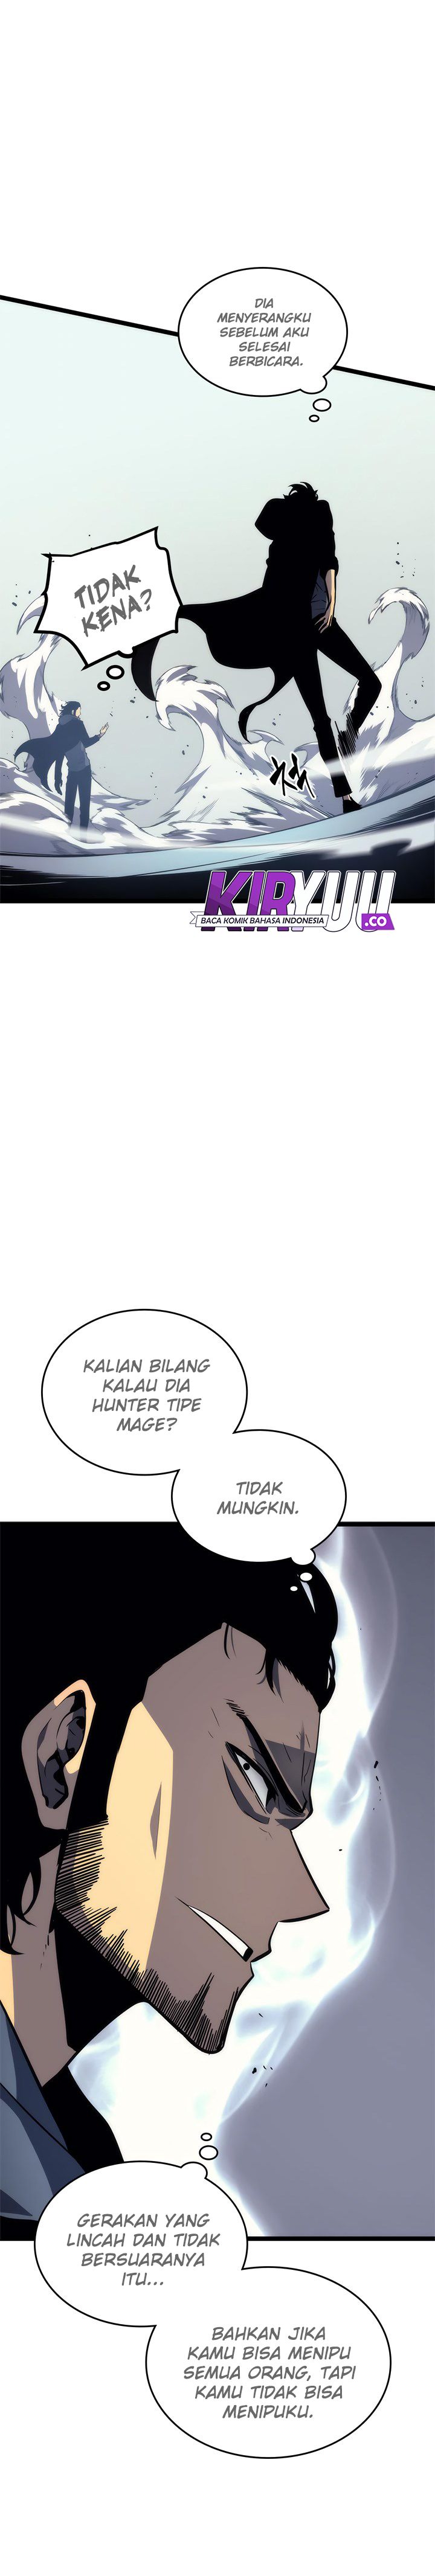 Solo Leveling Chapter 93